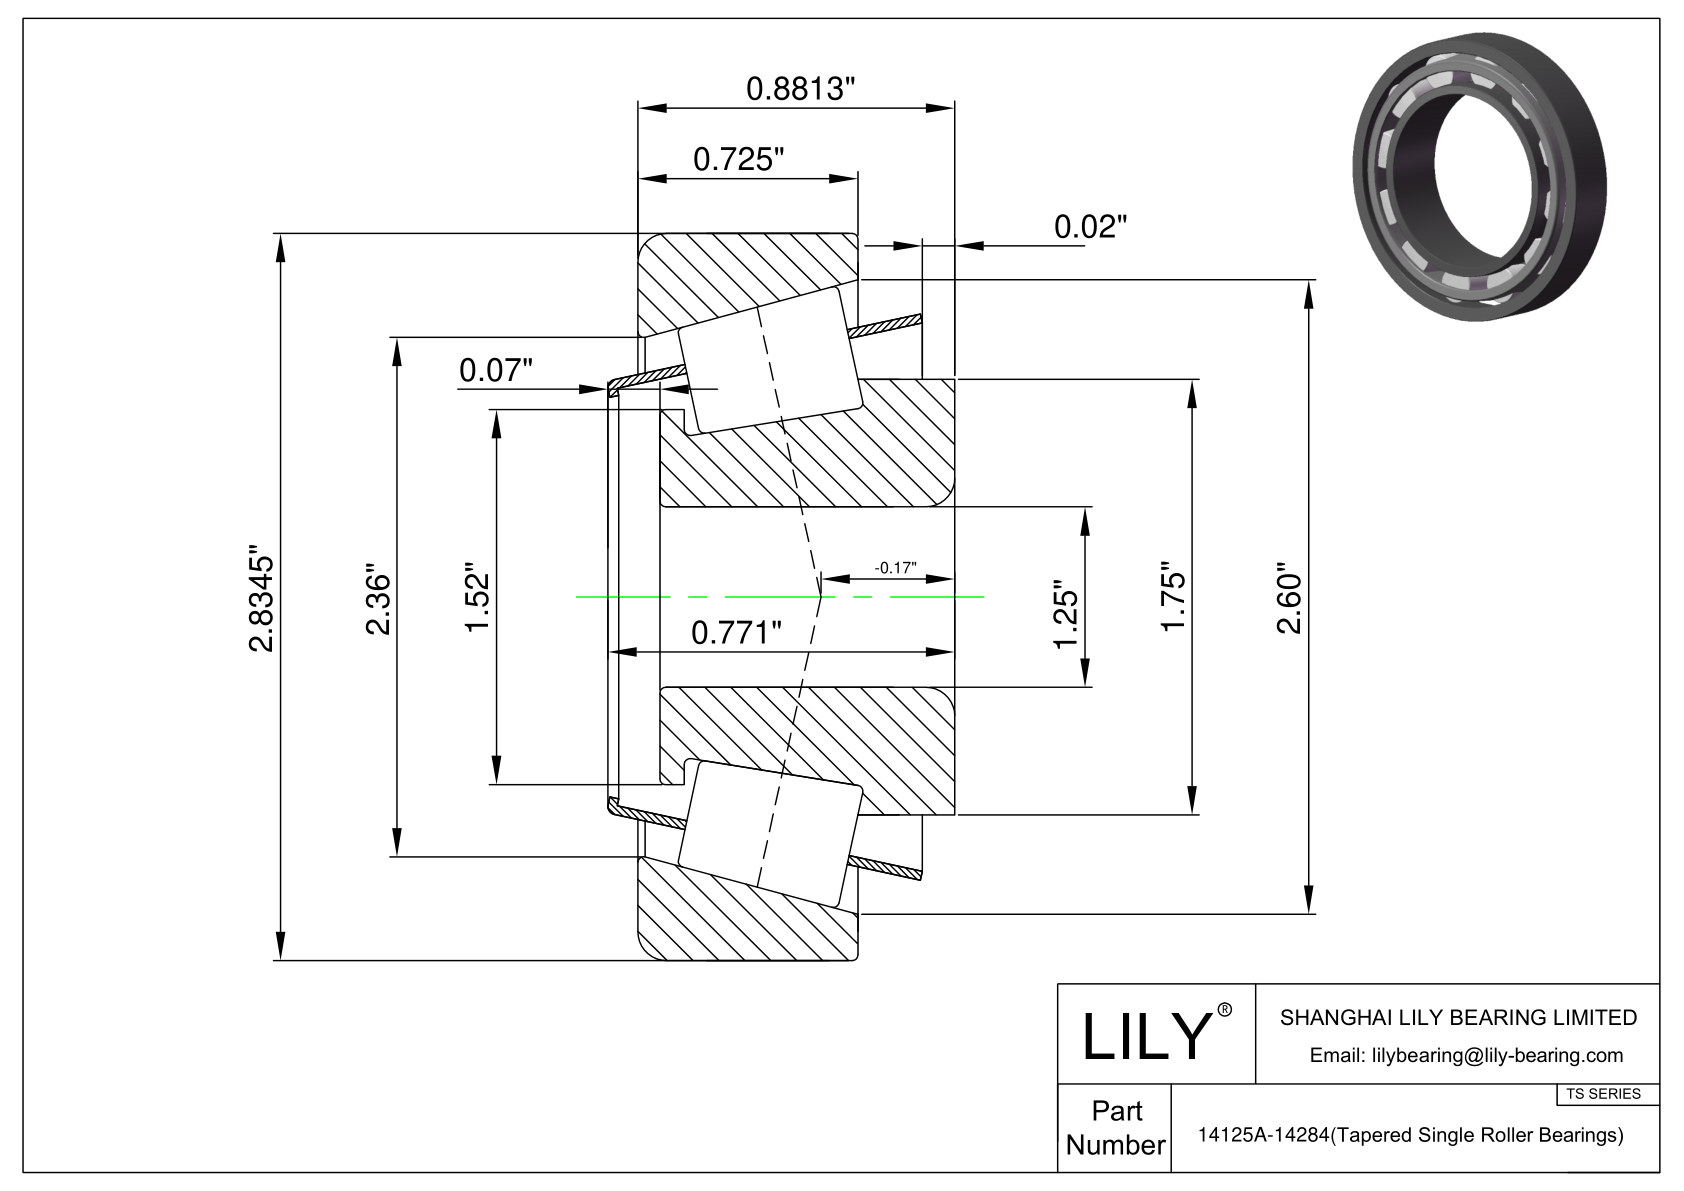 14125A-14284 TS (Tapered Single Roller Bearings) (Imperial) cad drawing